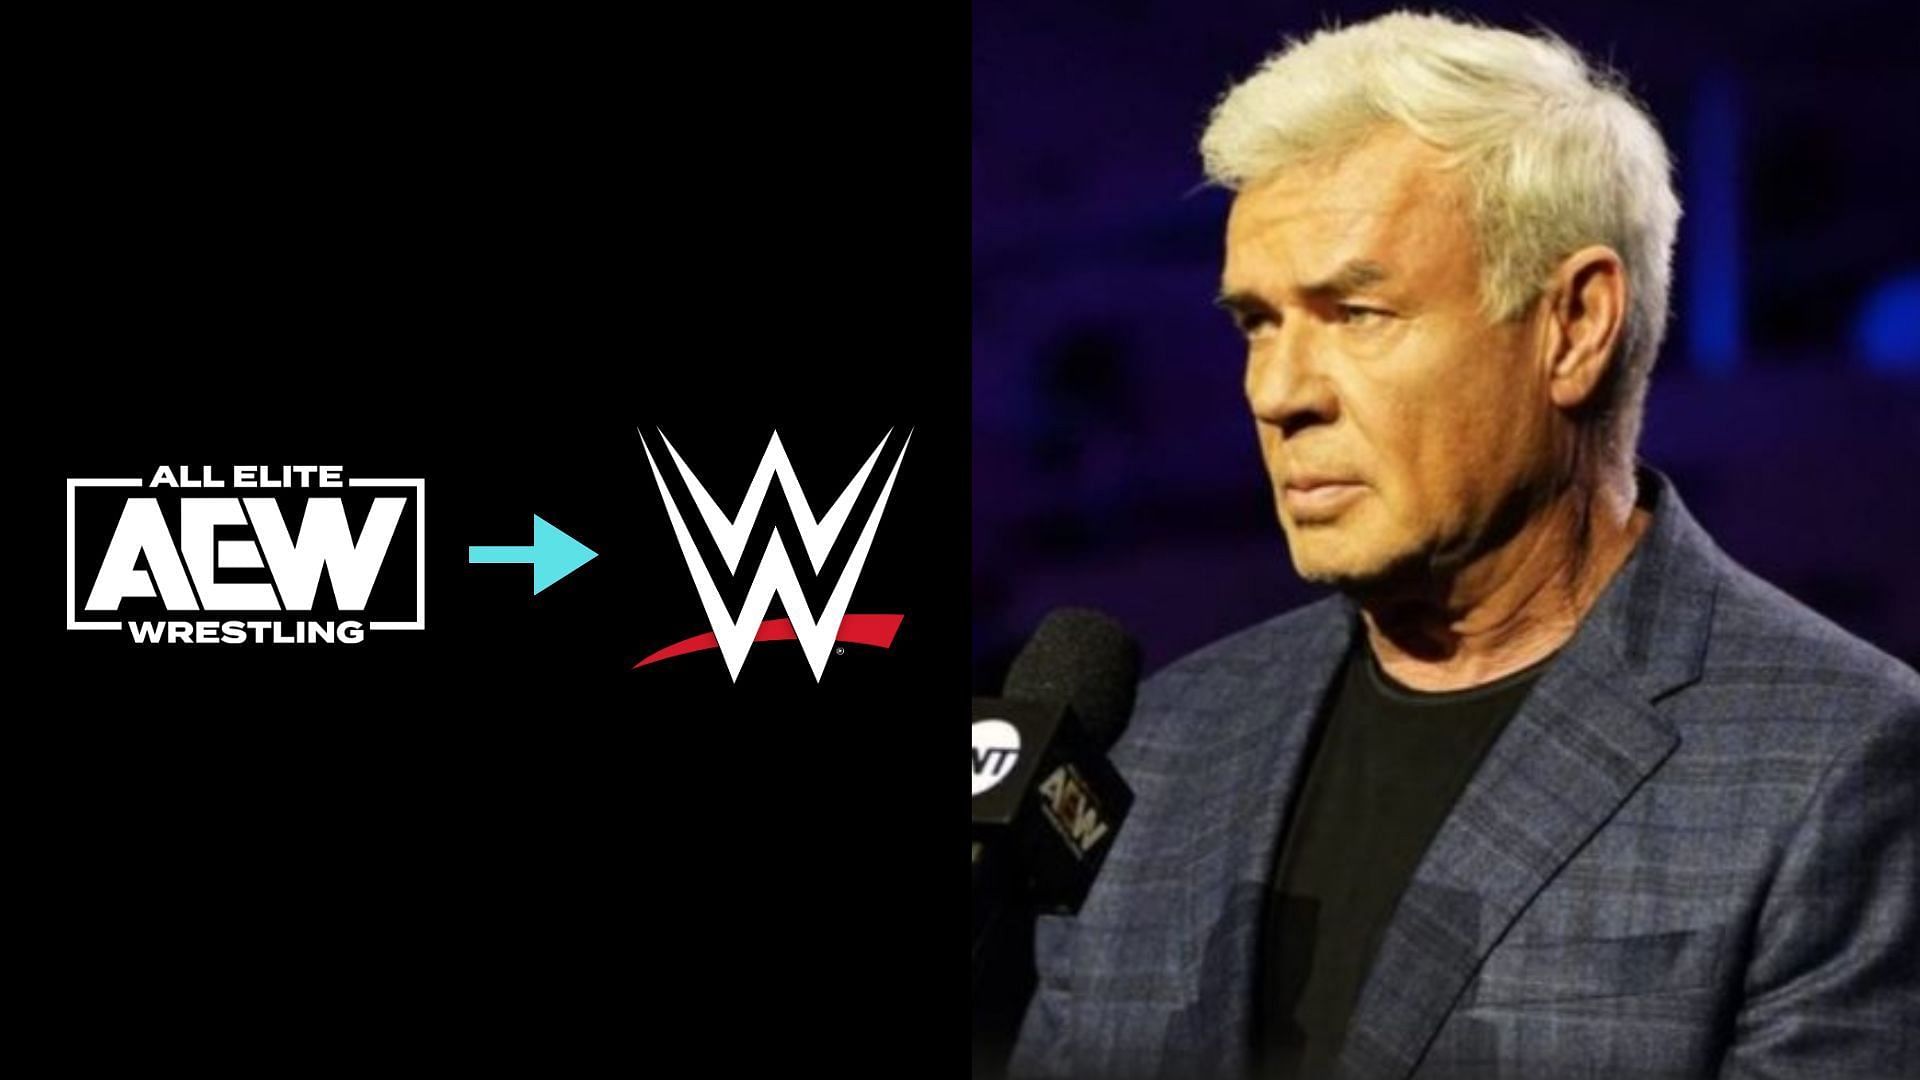 Eric Bischoff was inducted into the WWE Hall of Fame in 2021.